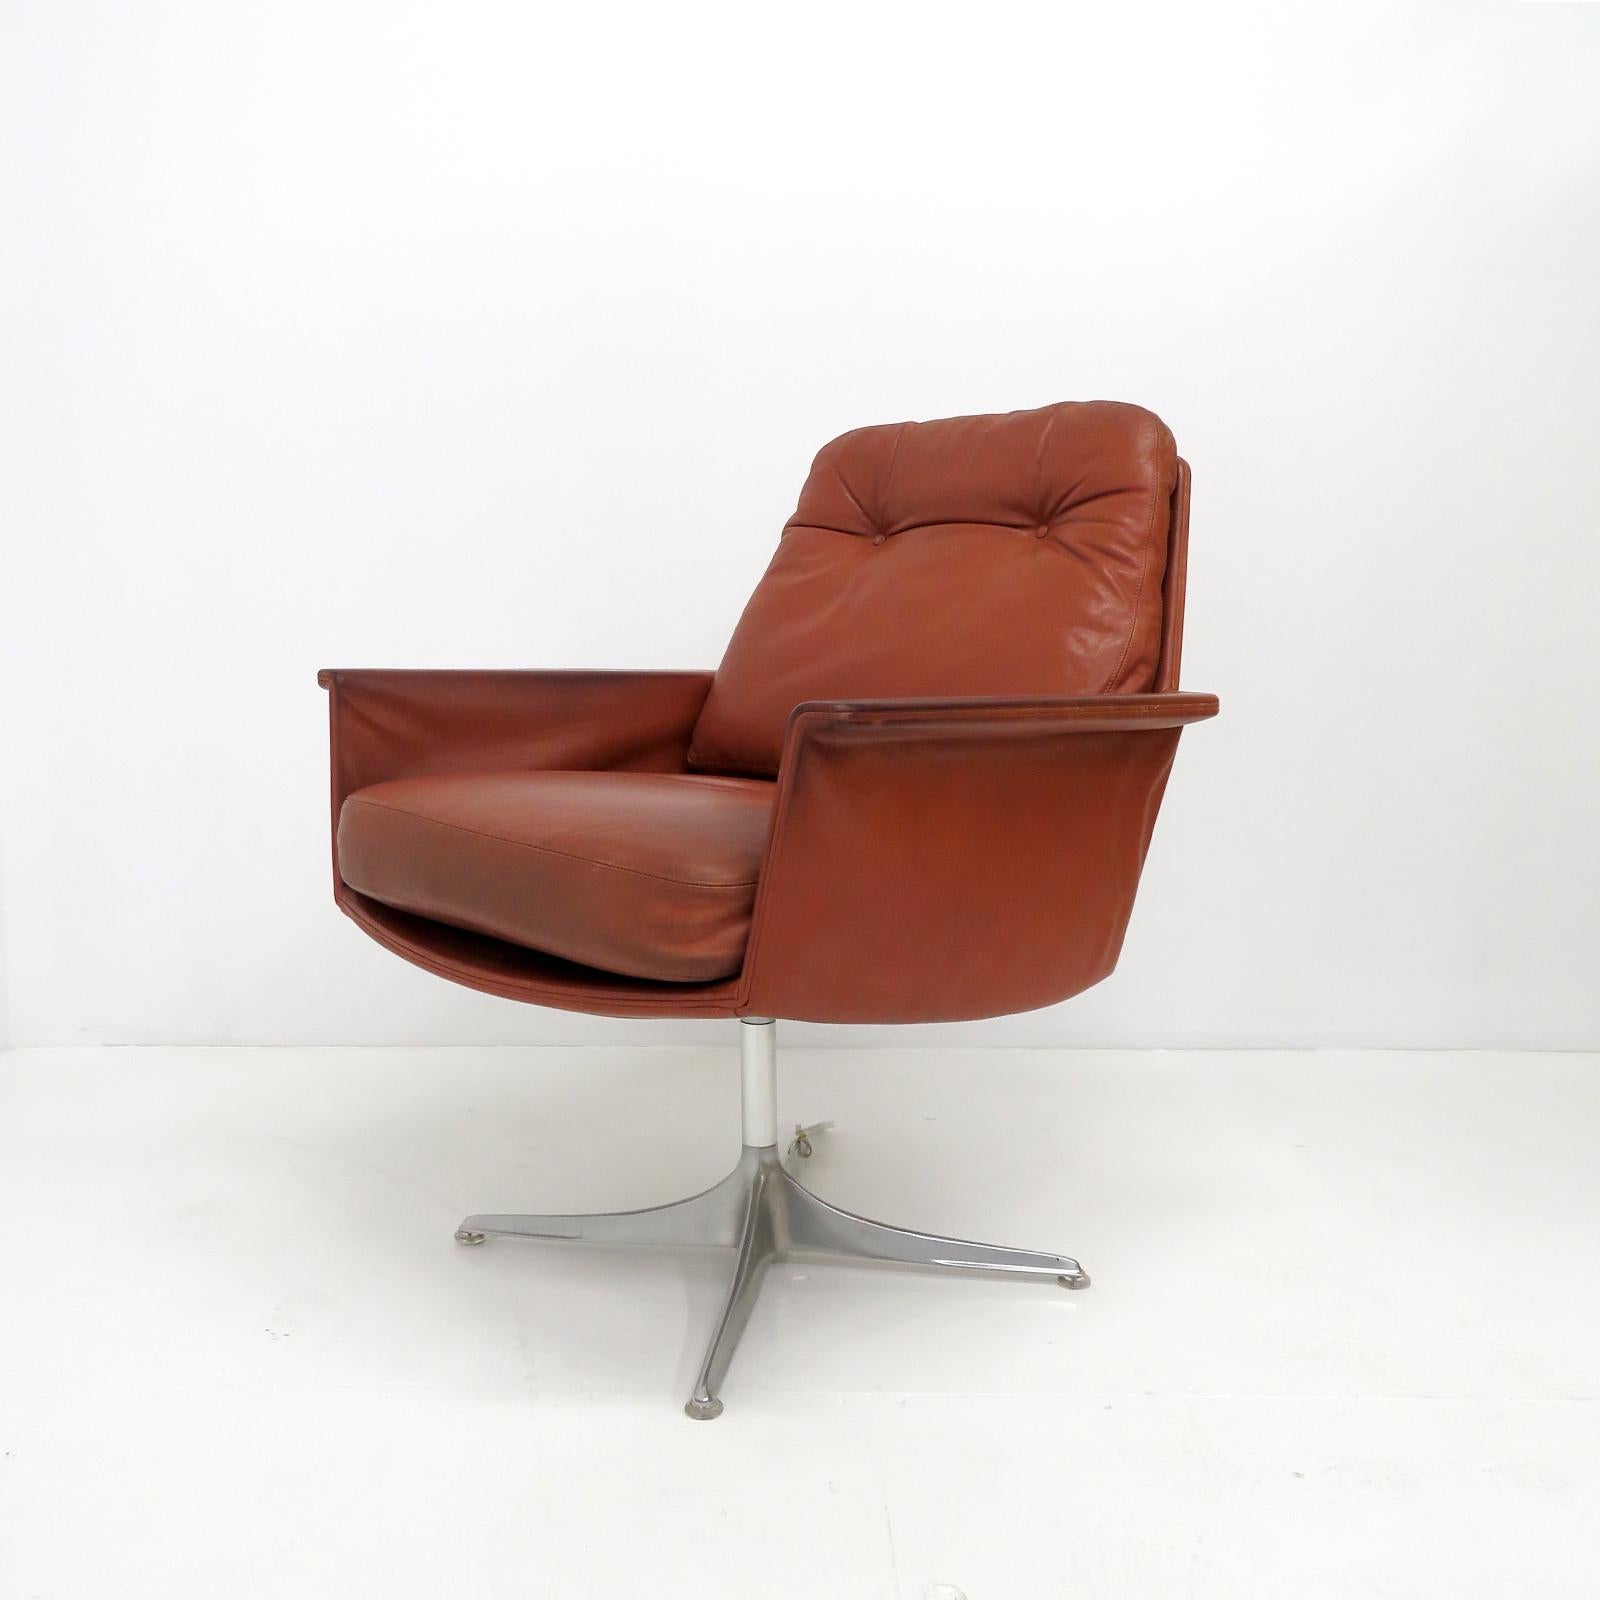 German Pair of Horst Brüning Sedia Lounge Chairs for Kill International, 1960s For Sale